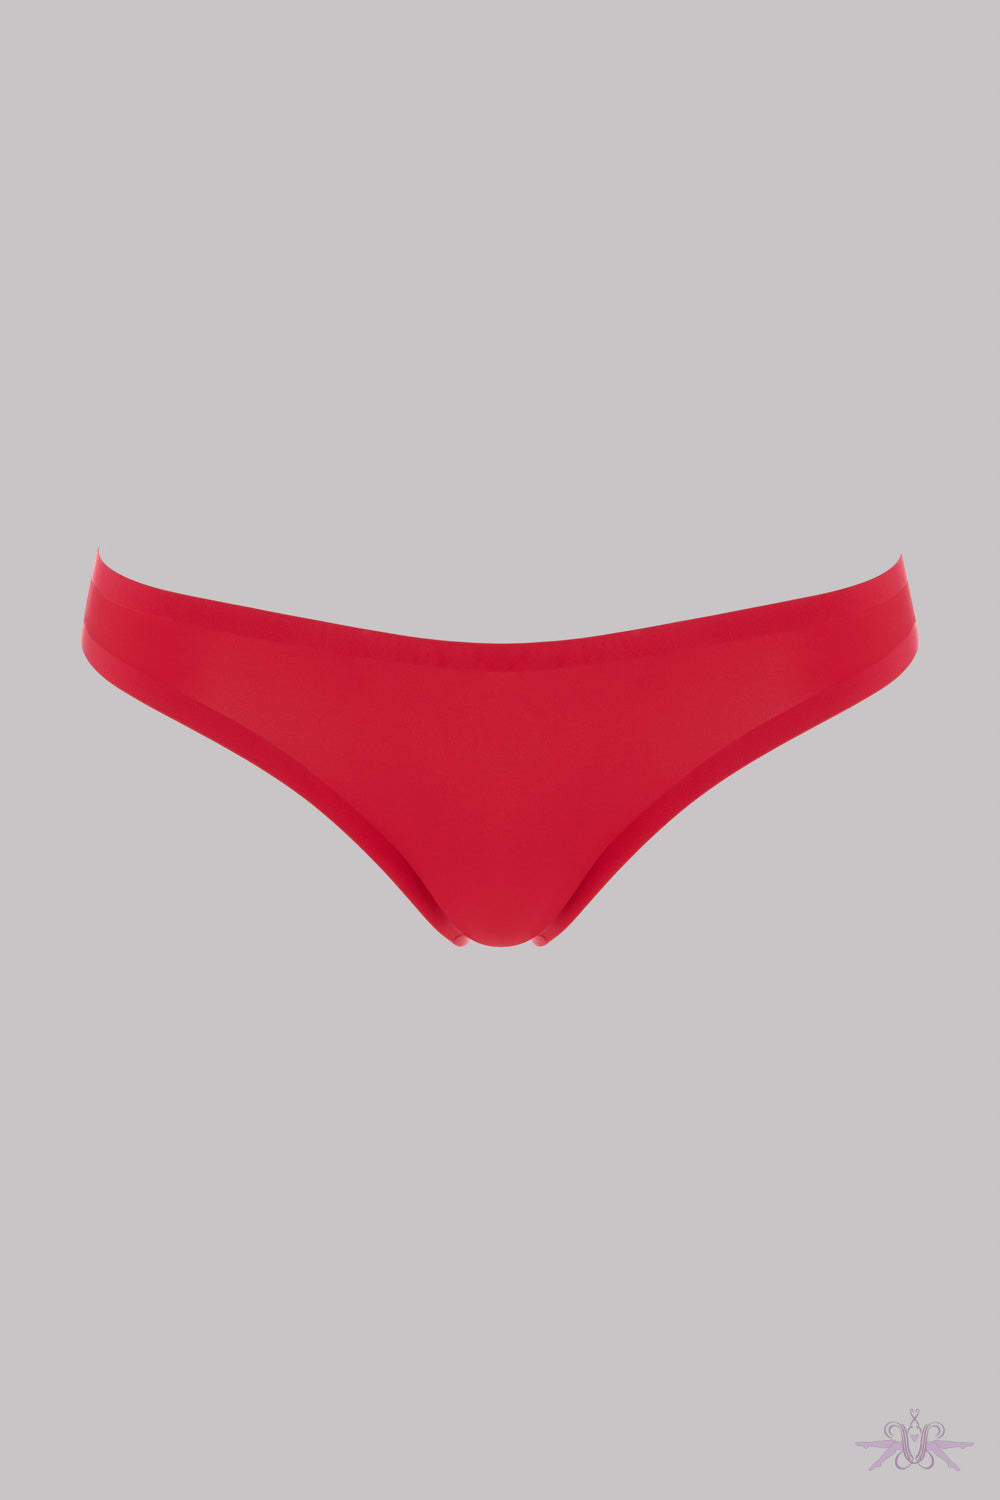 Maison Close Tapage Nocturne open thong